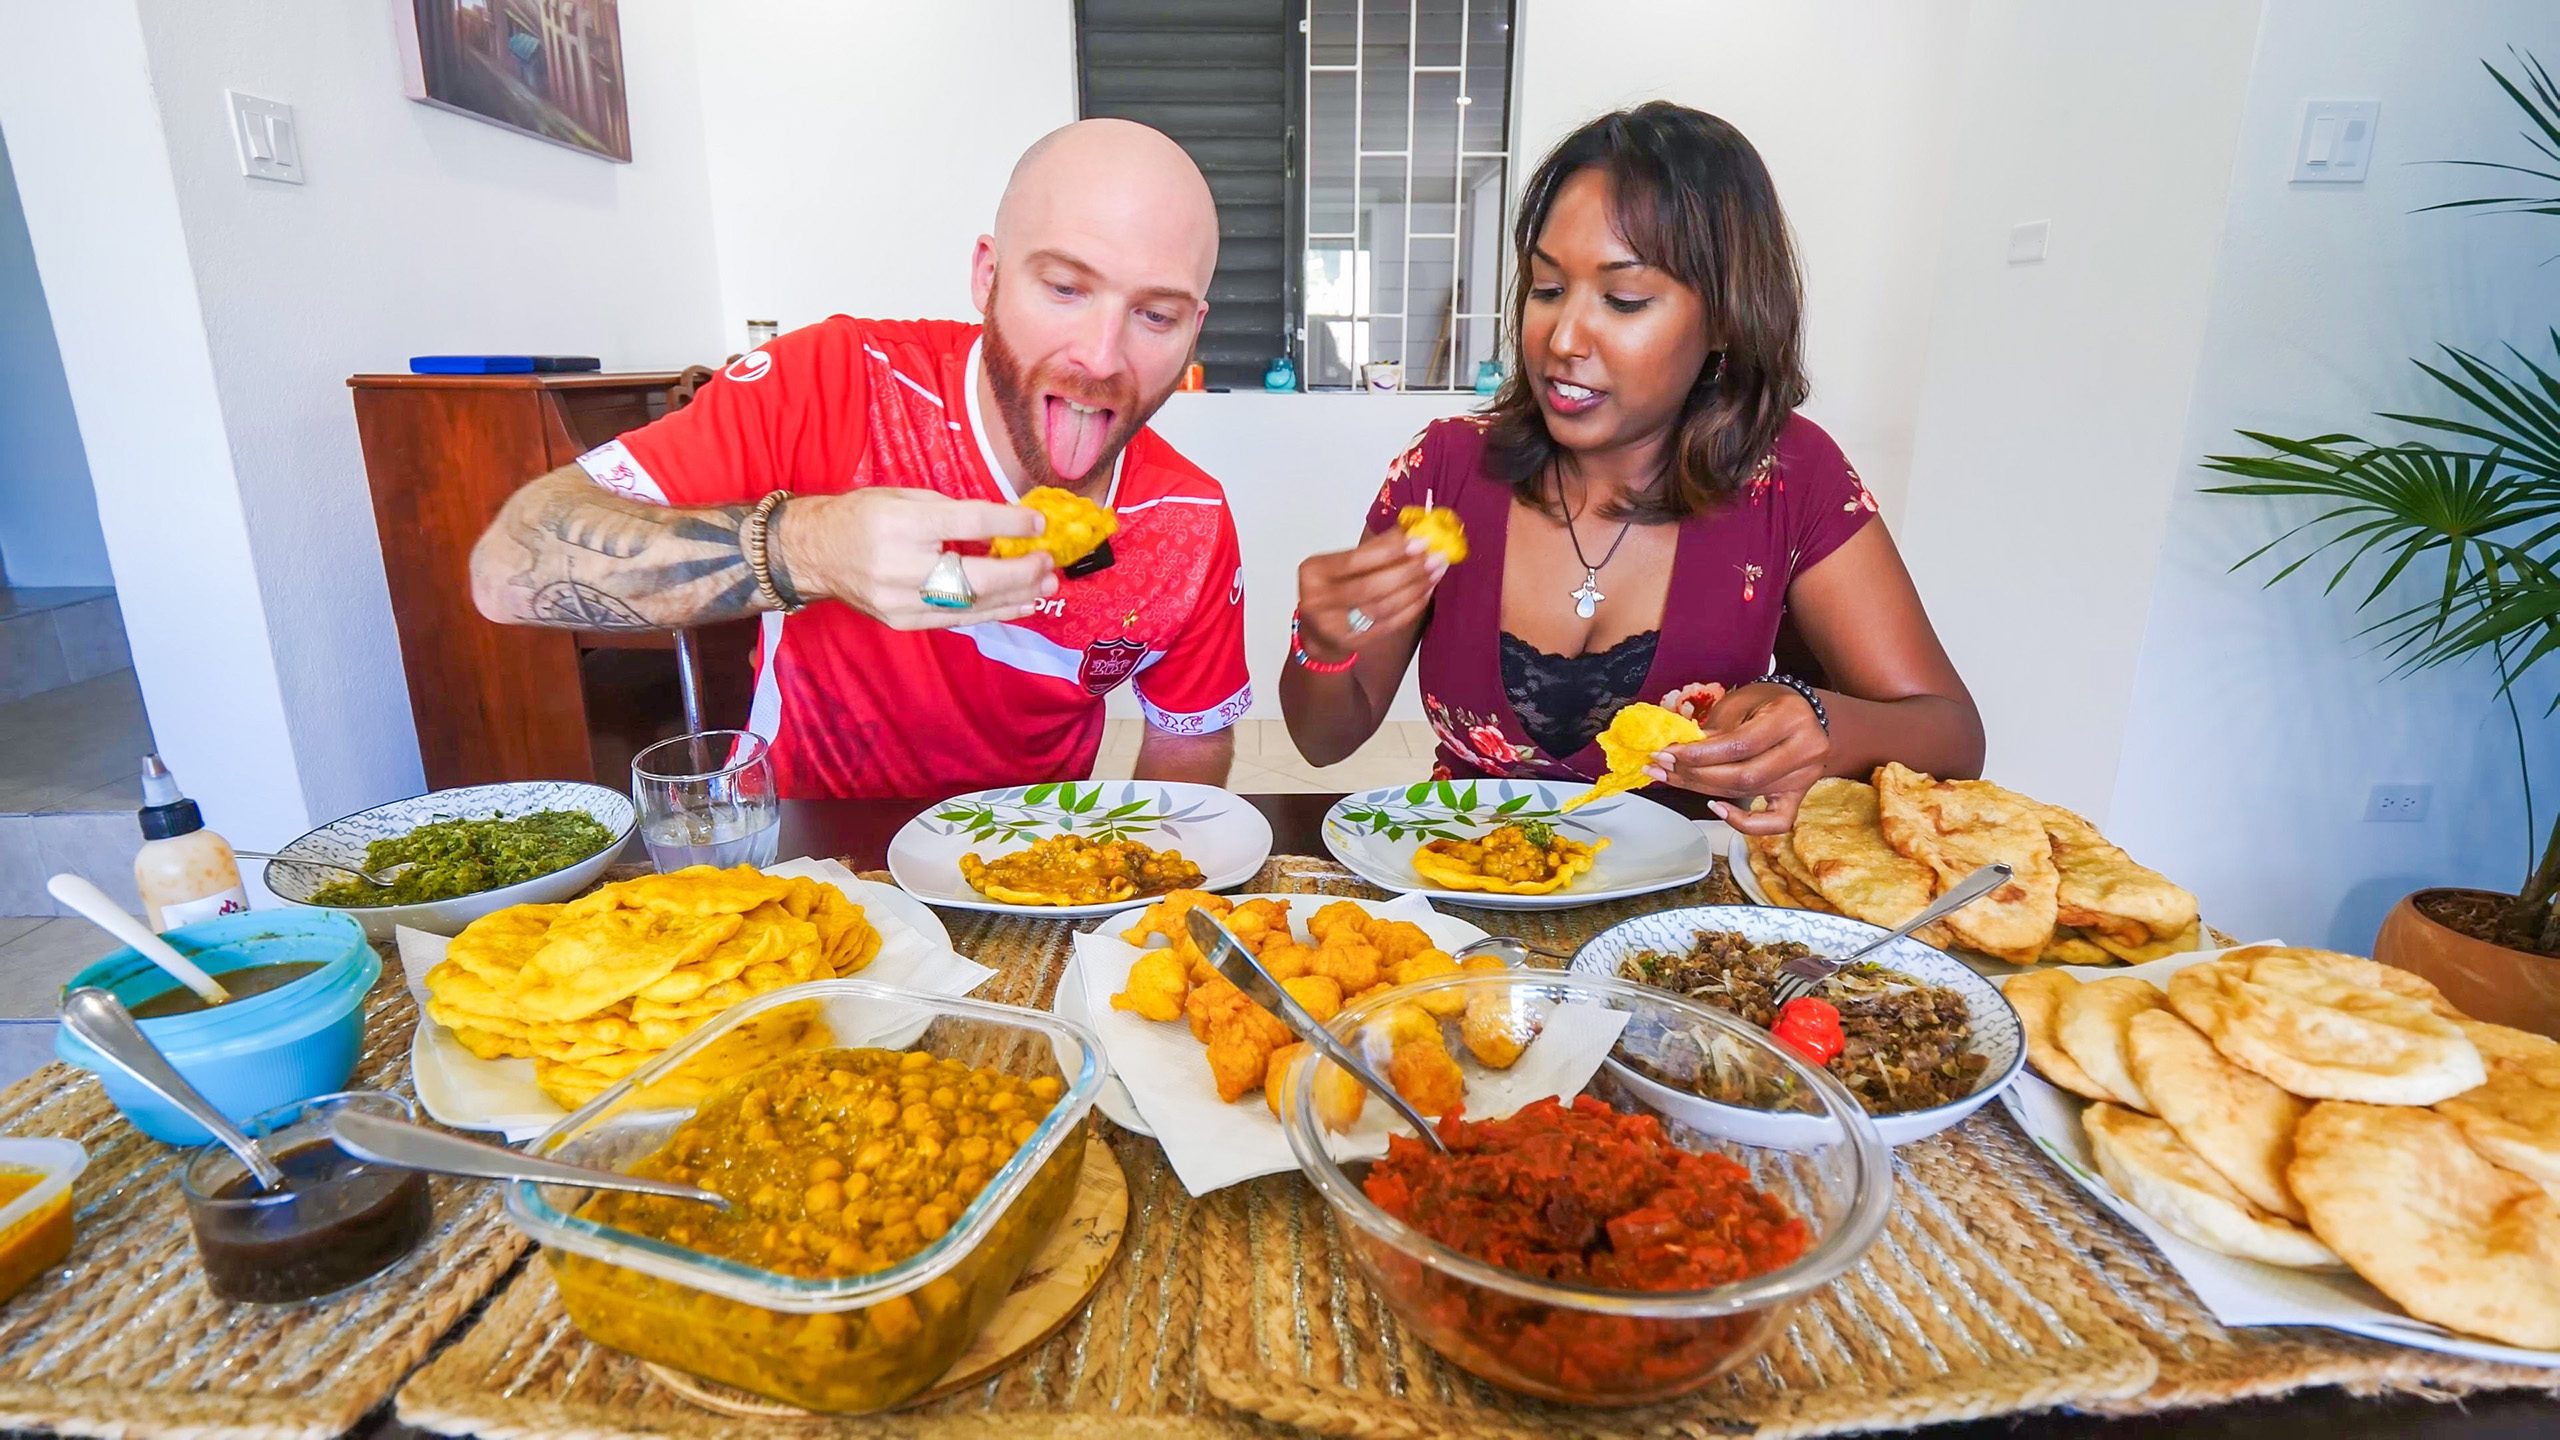 David Hoffmann and his friend Nerissa take their first bites of their Trini food breakfast in Barbados | Davidsbeenhere